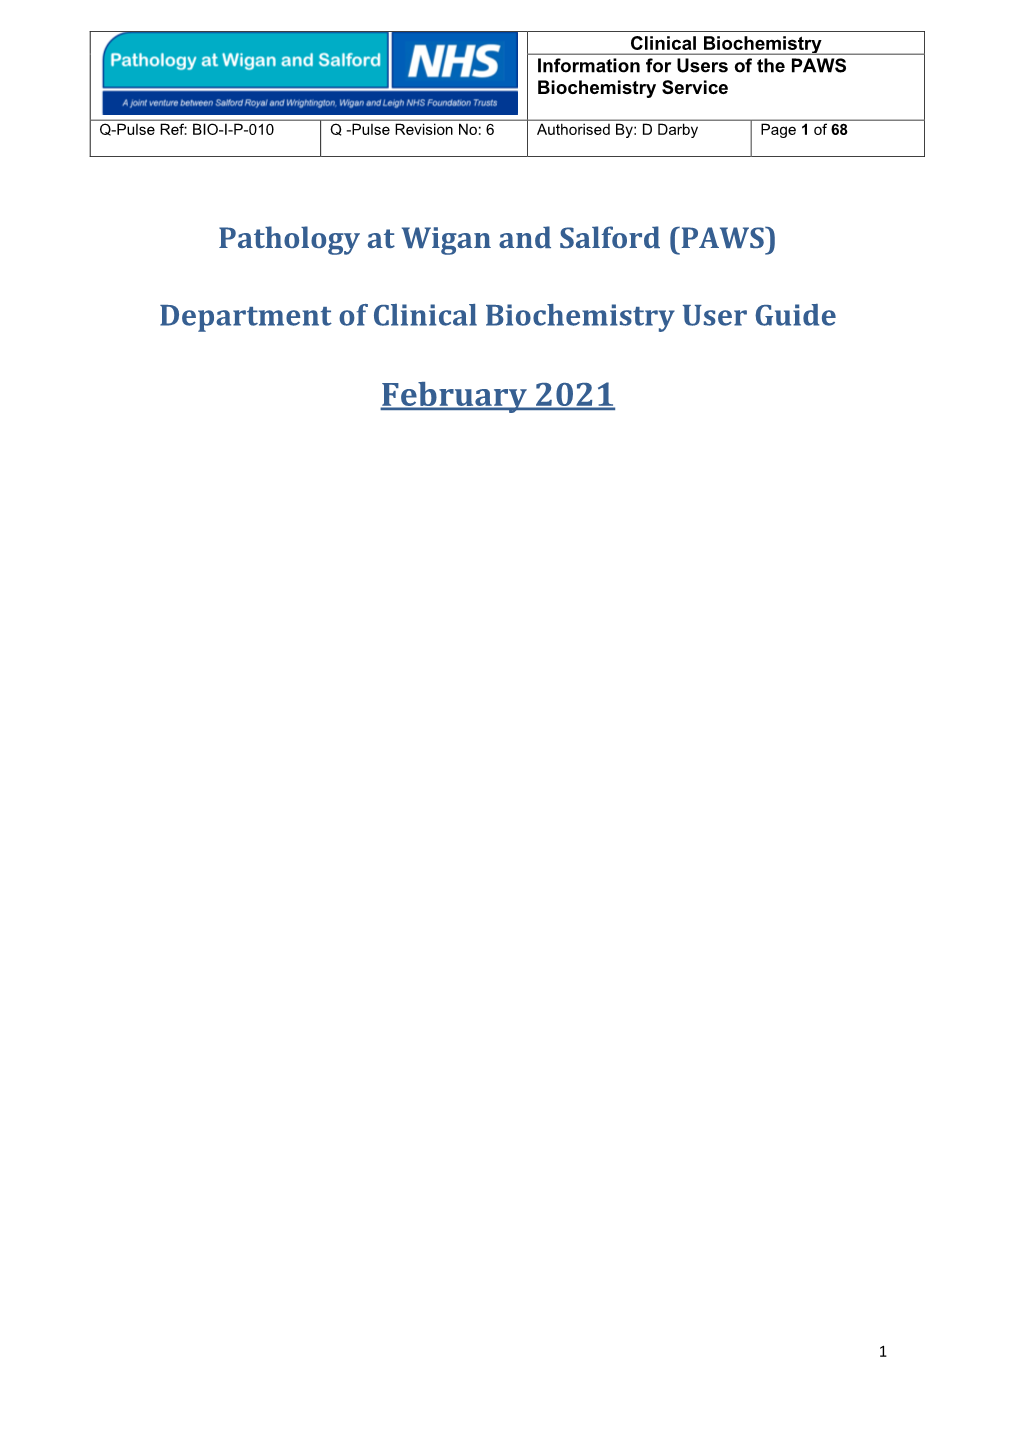 Pathology at Wigan and Salford (PAWS) Department of Clinical Biochemistry User Guide